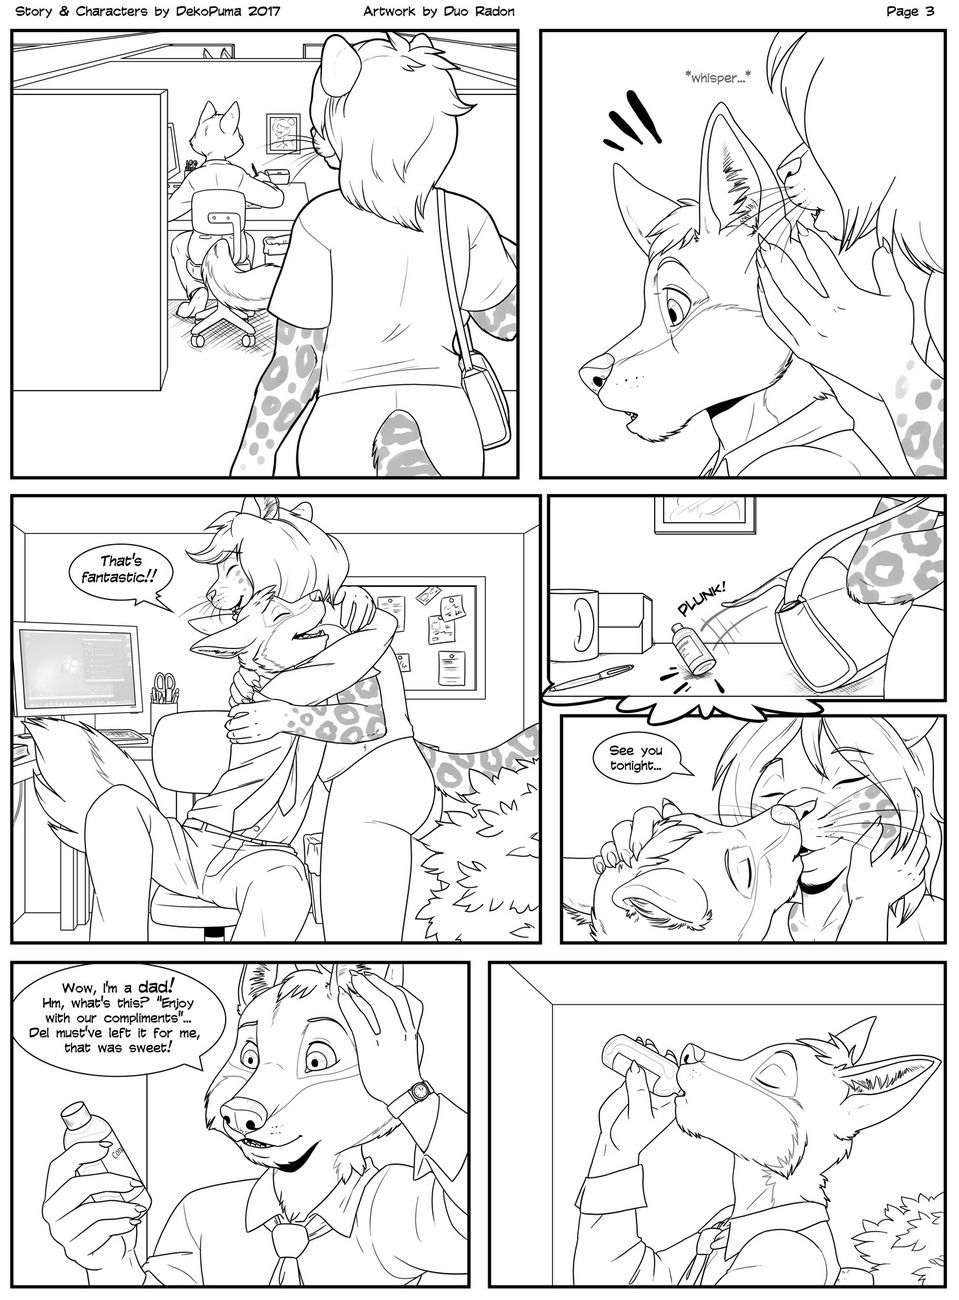 Extra Leite page 1